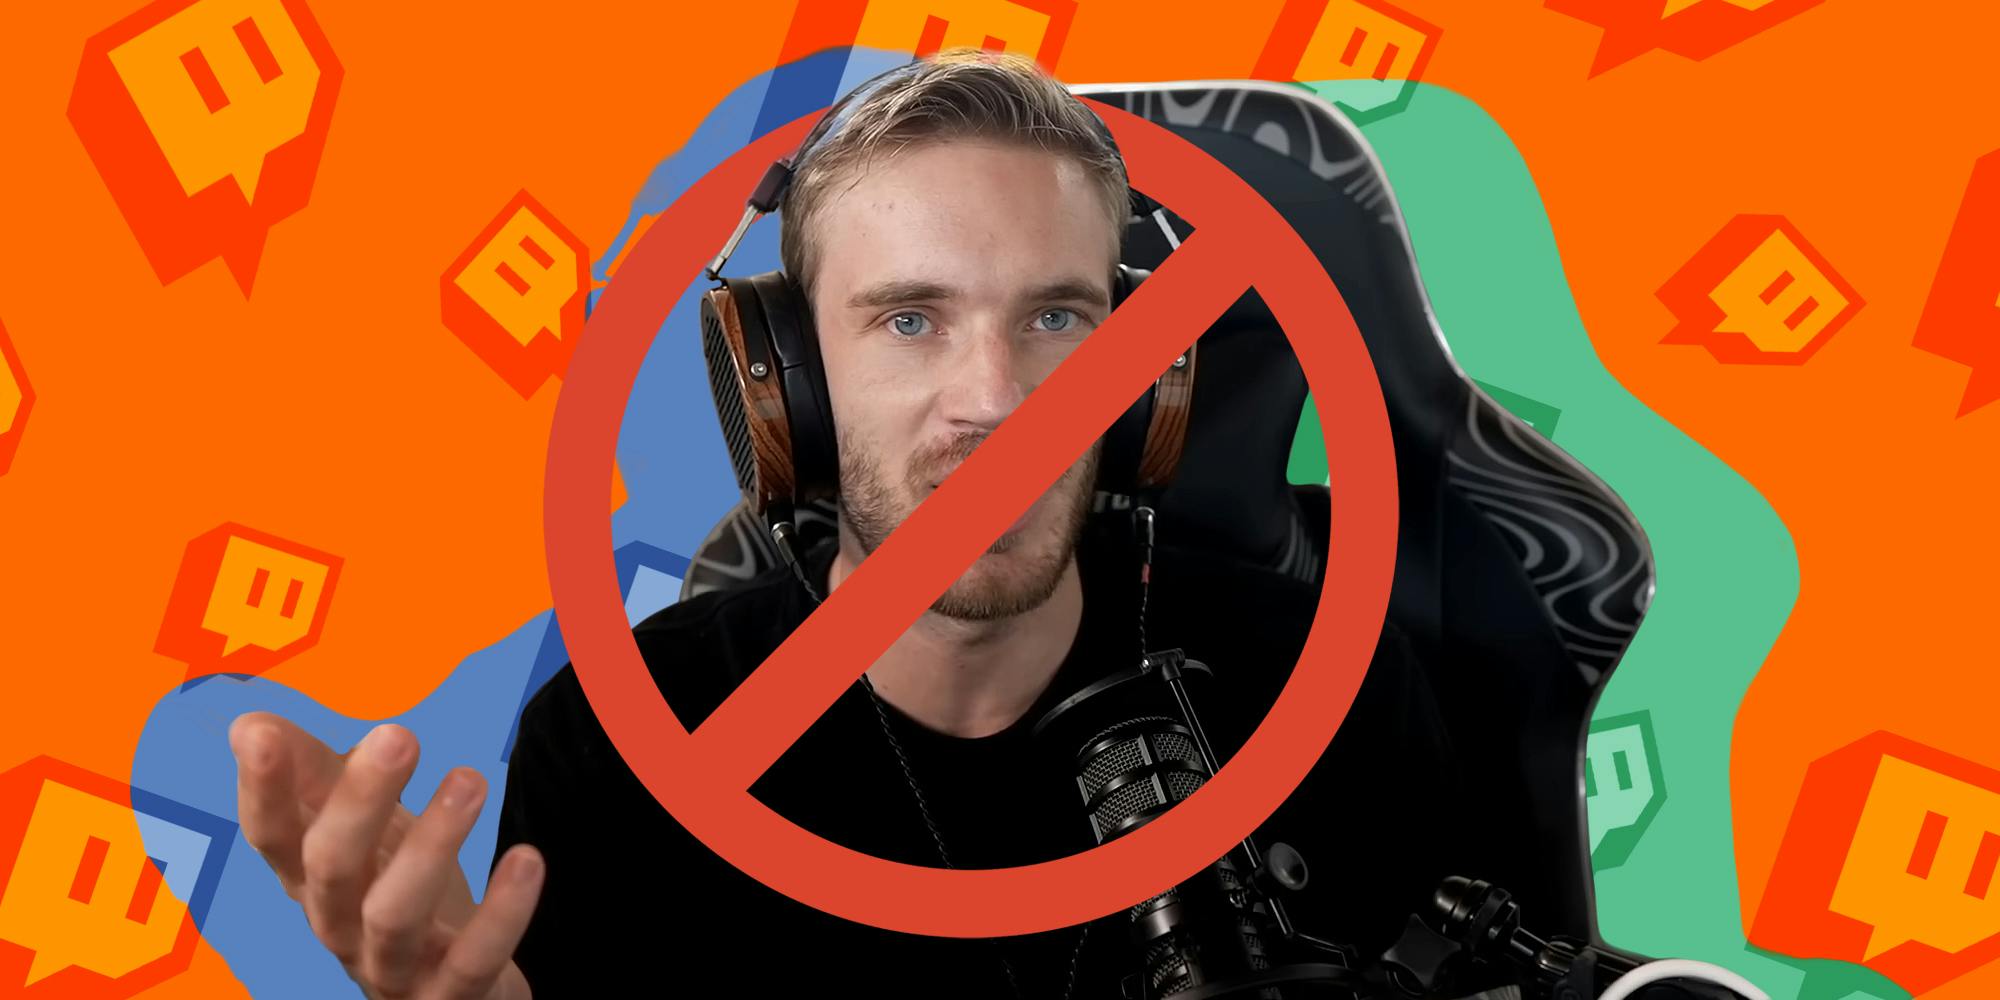 PewDiePie’s Twitch channel was banned, and fans are puzzled why